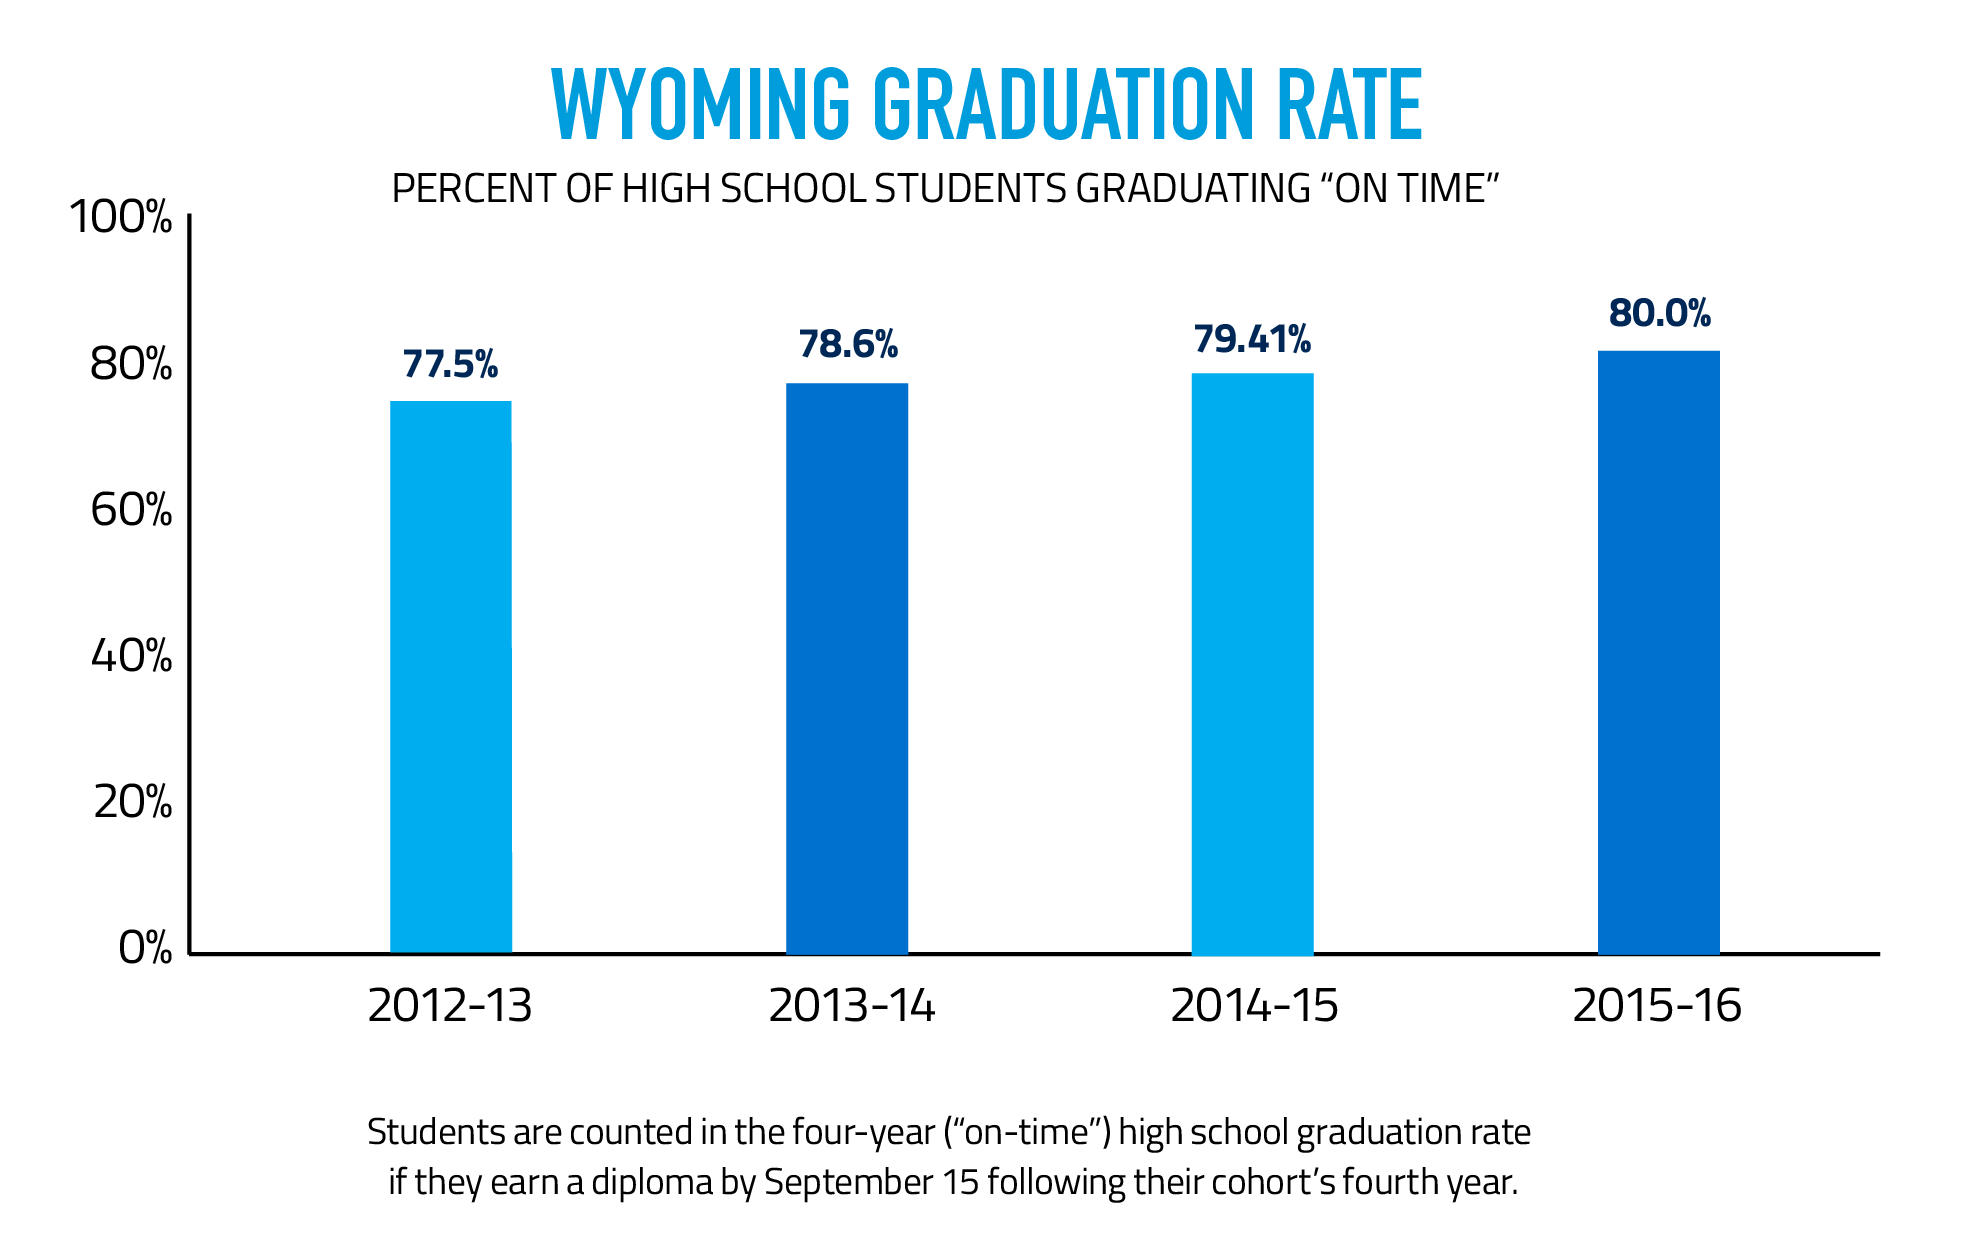 Wyoming Graduation Rate, Percent of high school students graduating "on time". A graph shows the graduation rate was 77.5% in 2012-13, 78.6% in 2013-14, 79,41% in 2014-15, and 80.0% in 2015-16. Students are counted in the four-year, or on-time, high school graduation rate if they earn a diploma by September 15 following their cohort's fourth year.